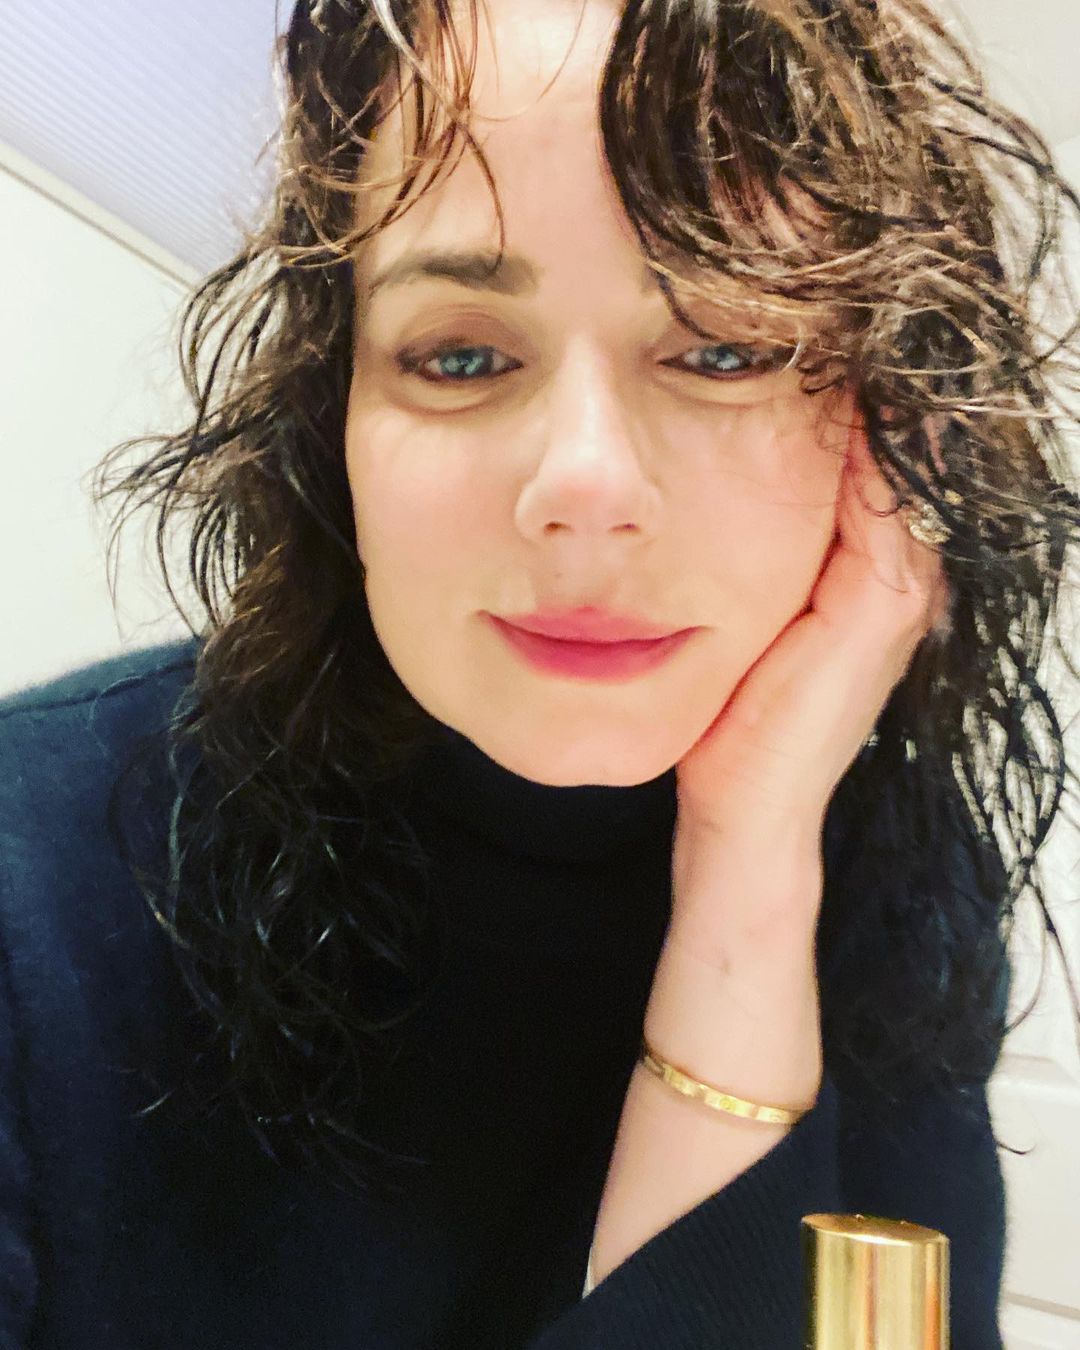 Mia Kirshner recently revealed that she recovered from Cancer.